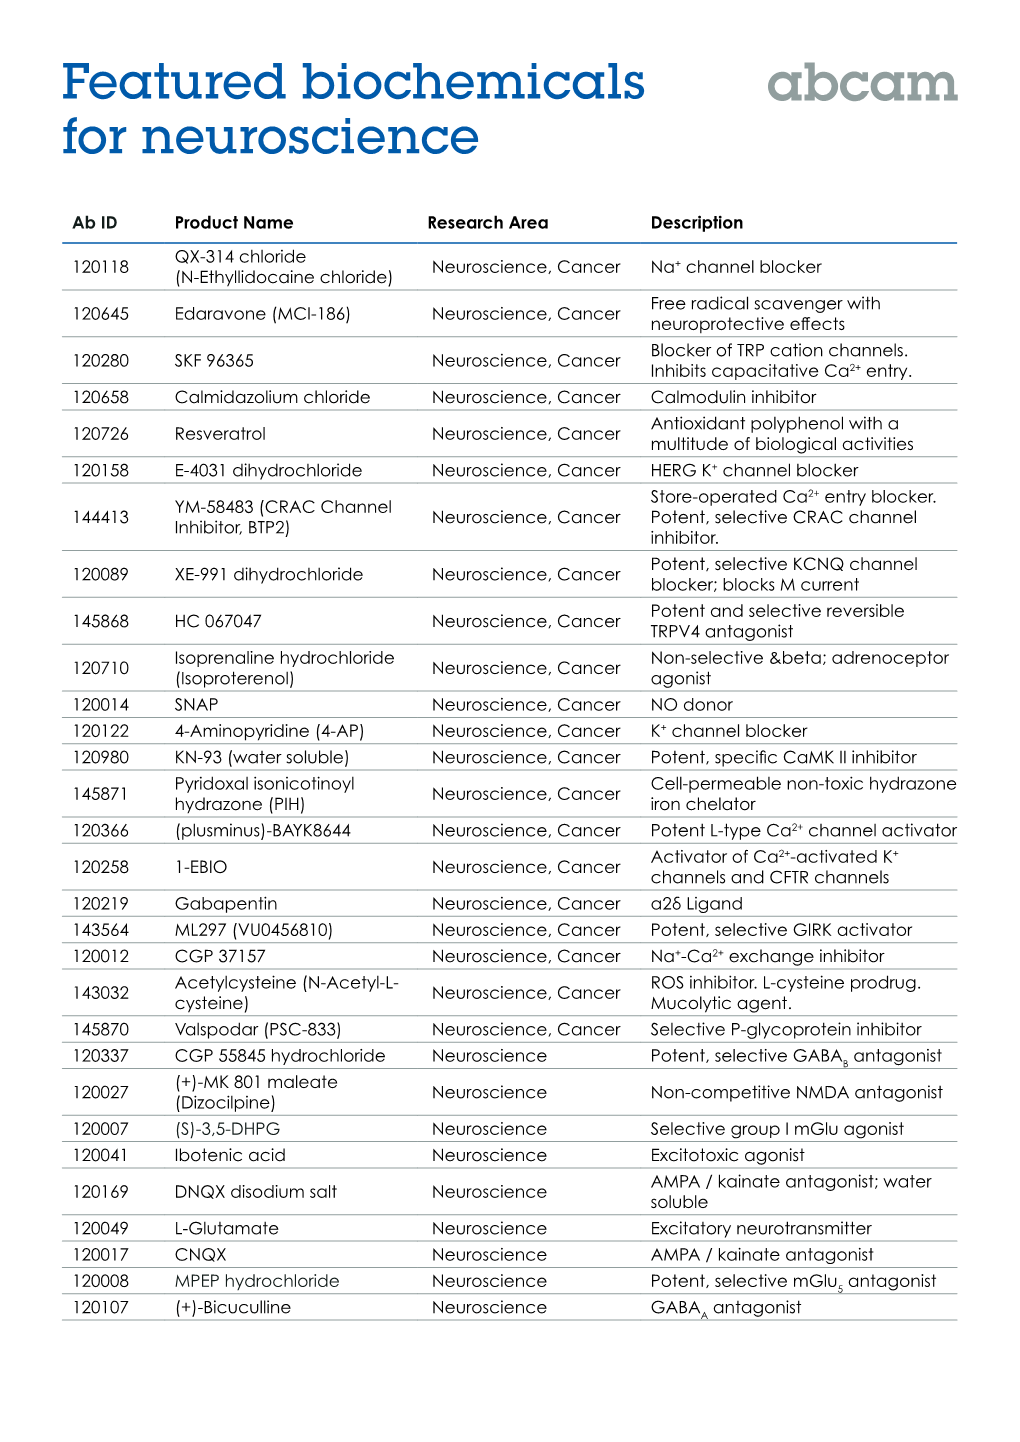 Featured Biochemicals for Neuroscience